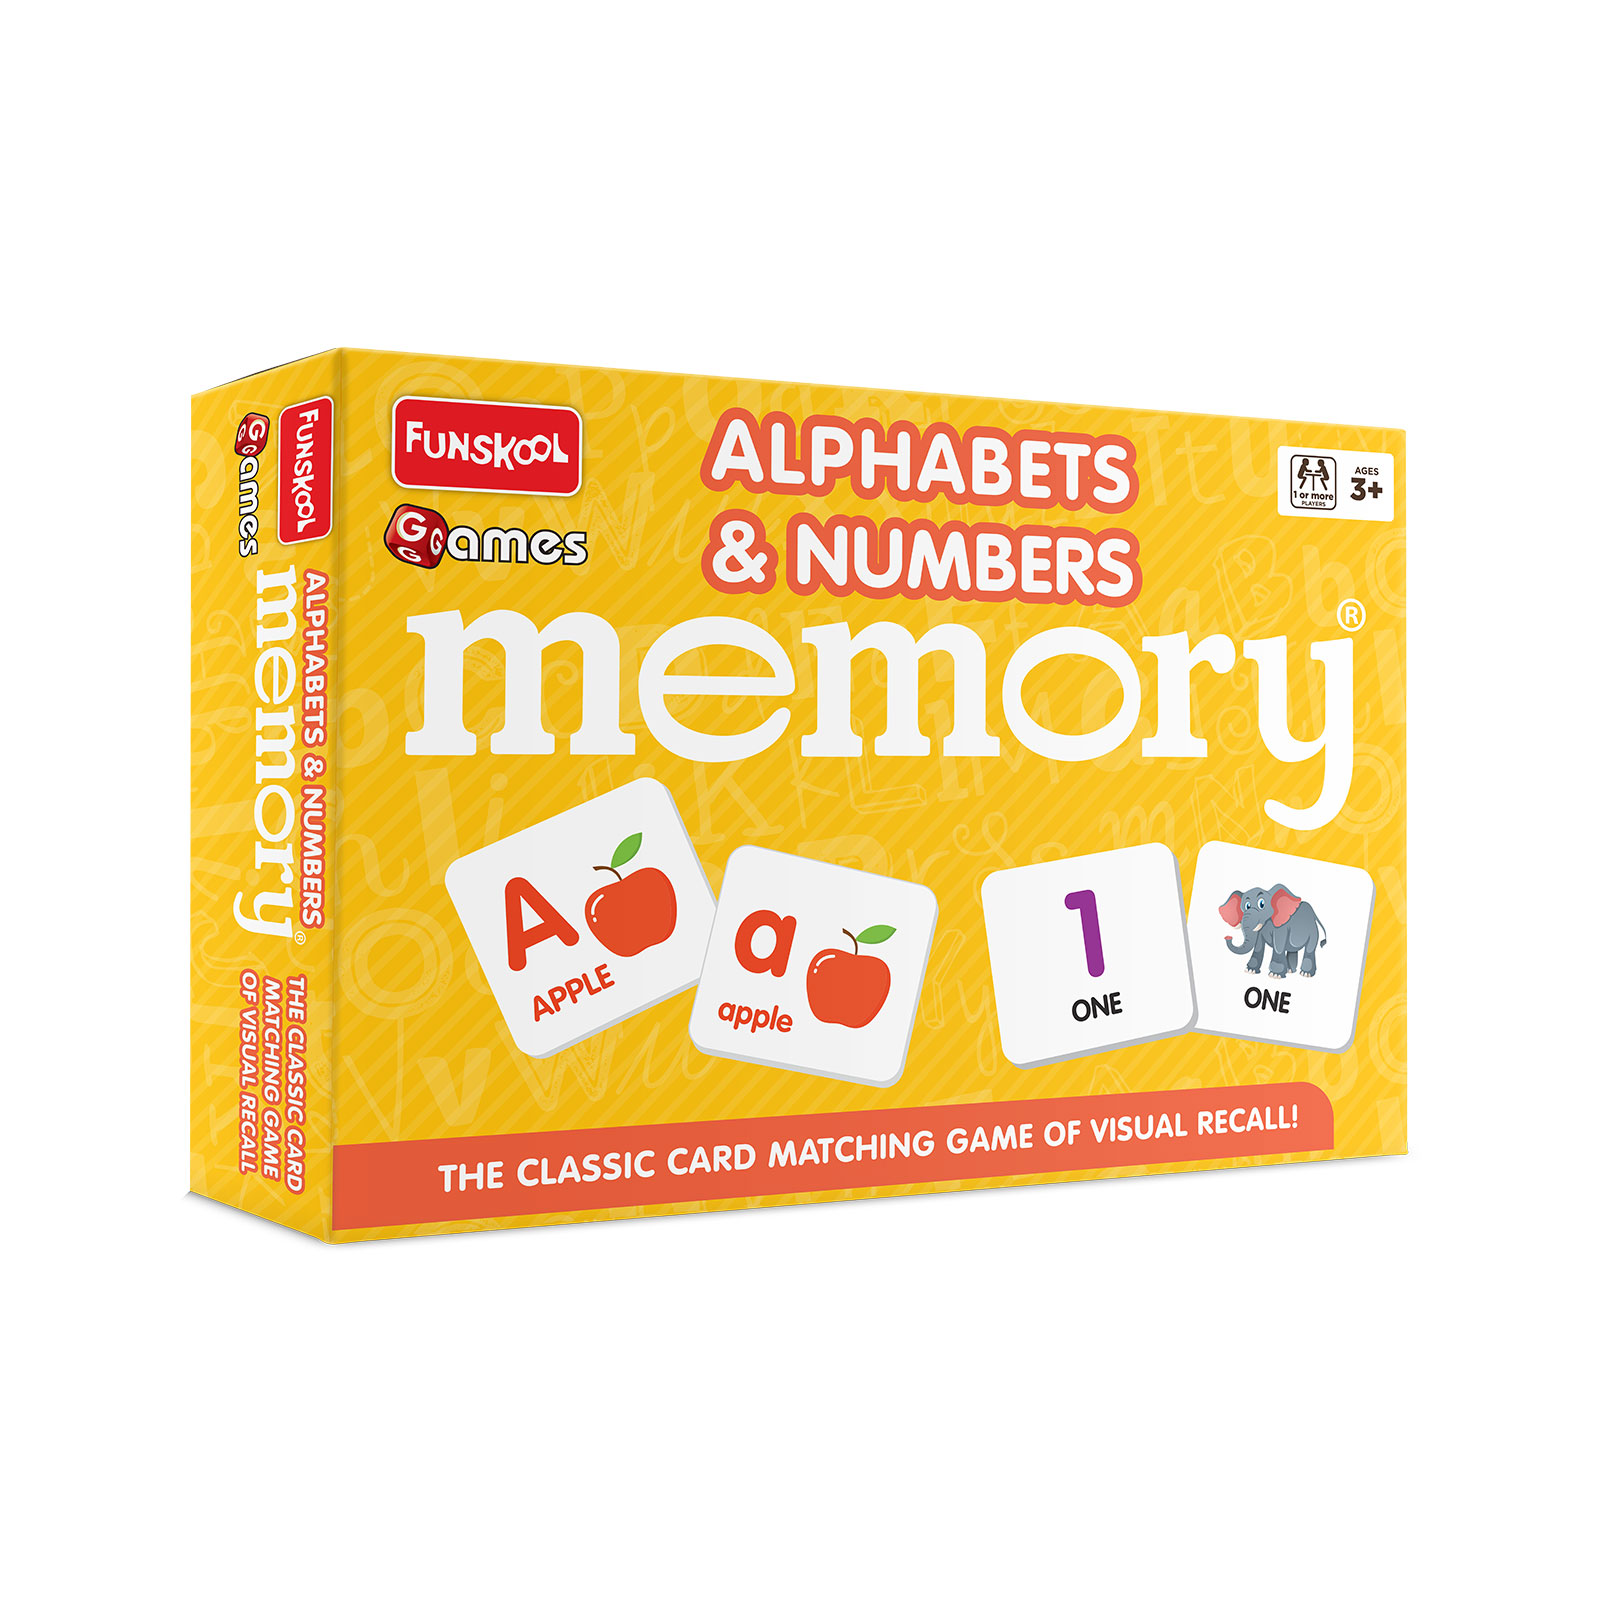 Alphabets & Numbers Memory